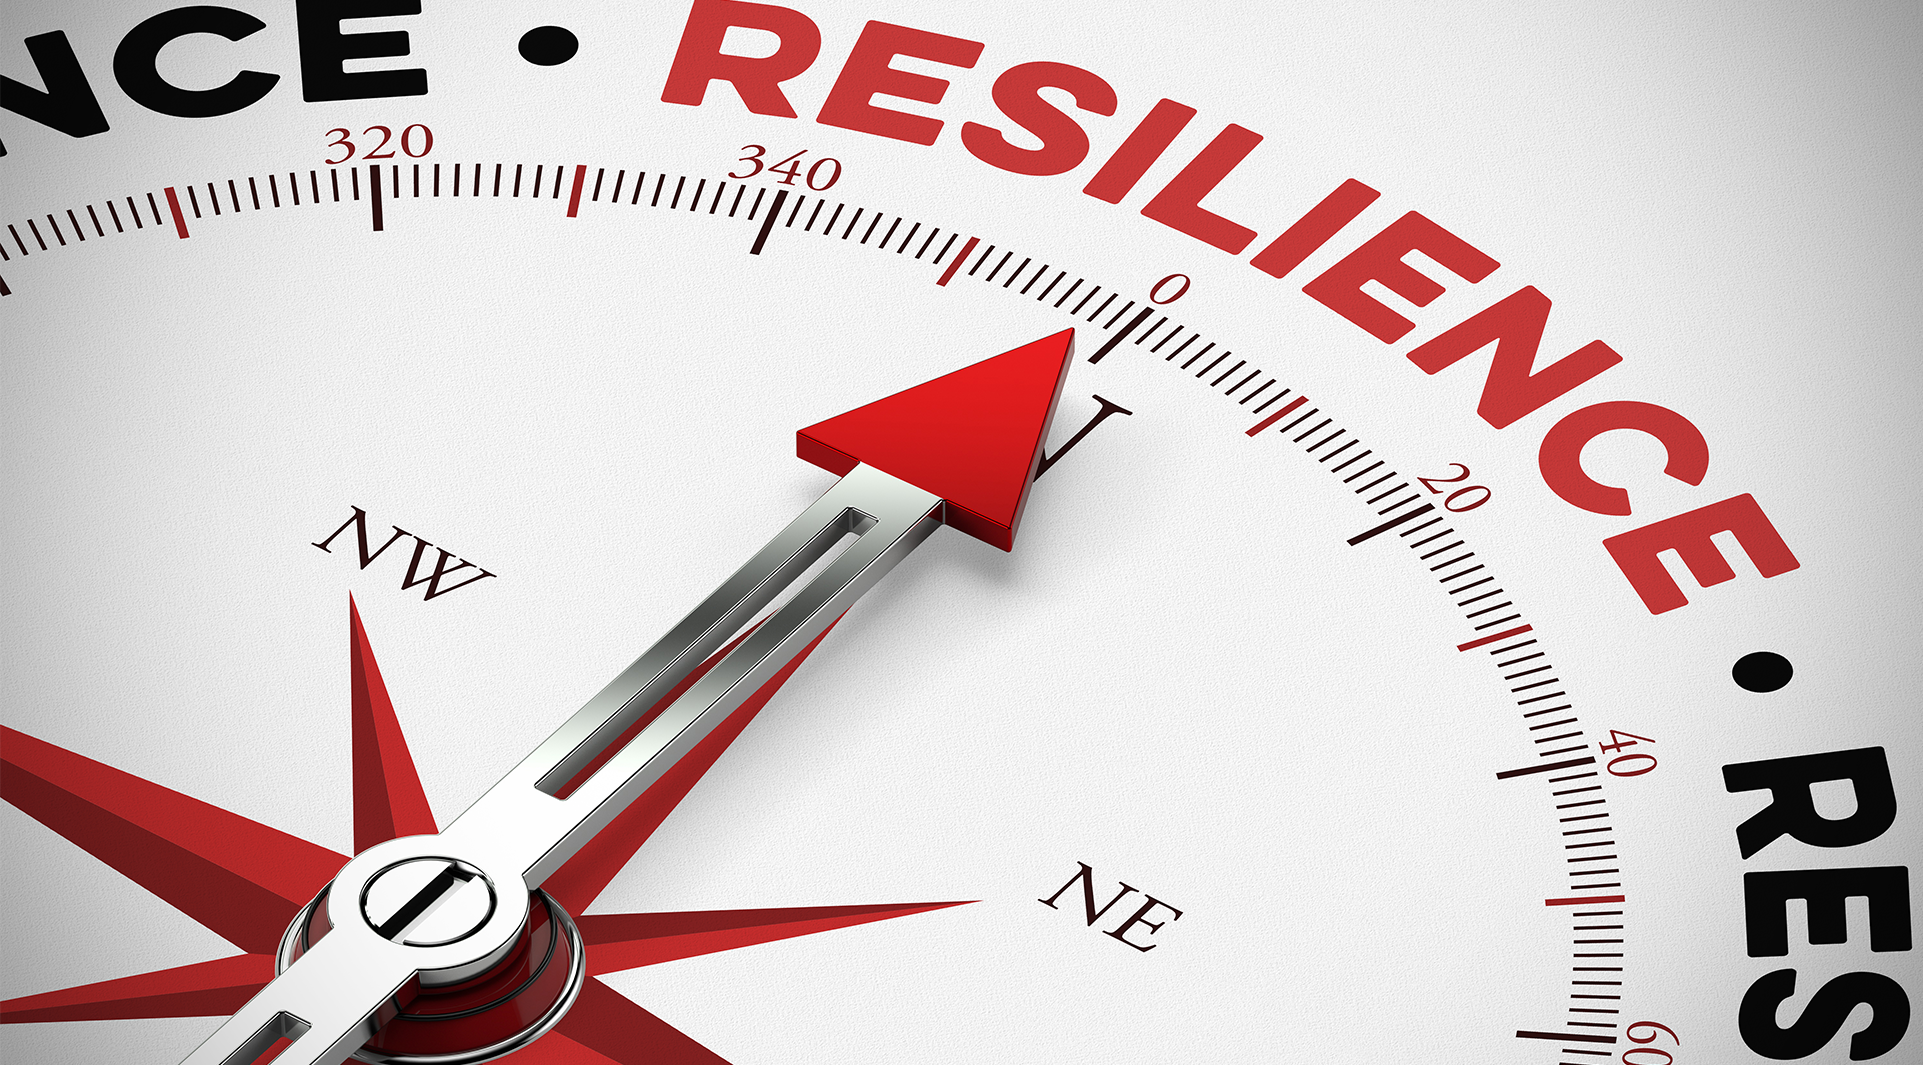 October 3rd MAPP (Online): Building Community Resilience Through